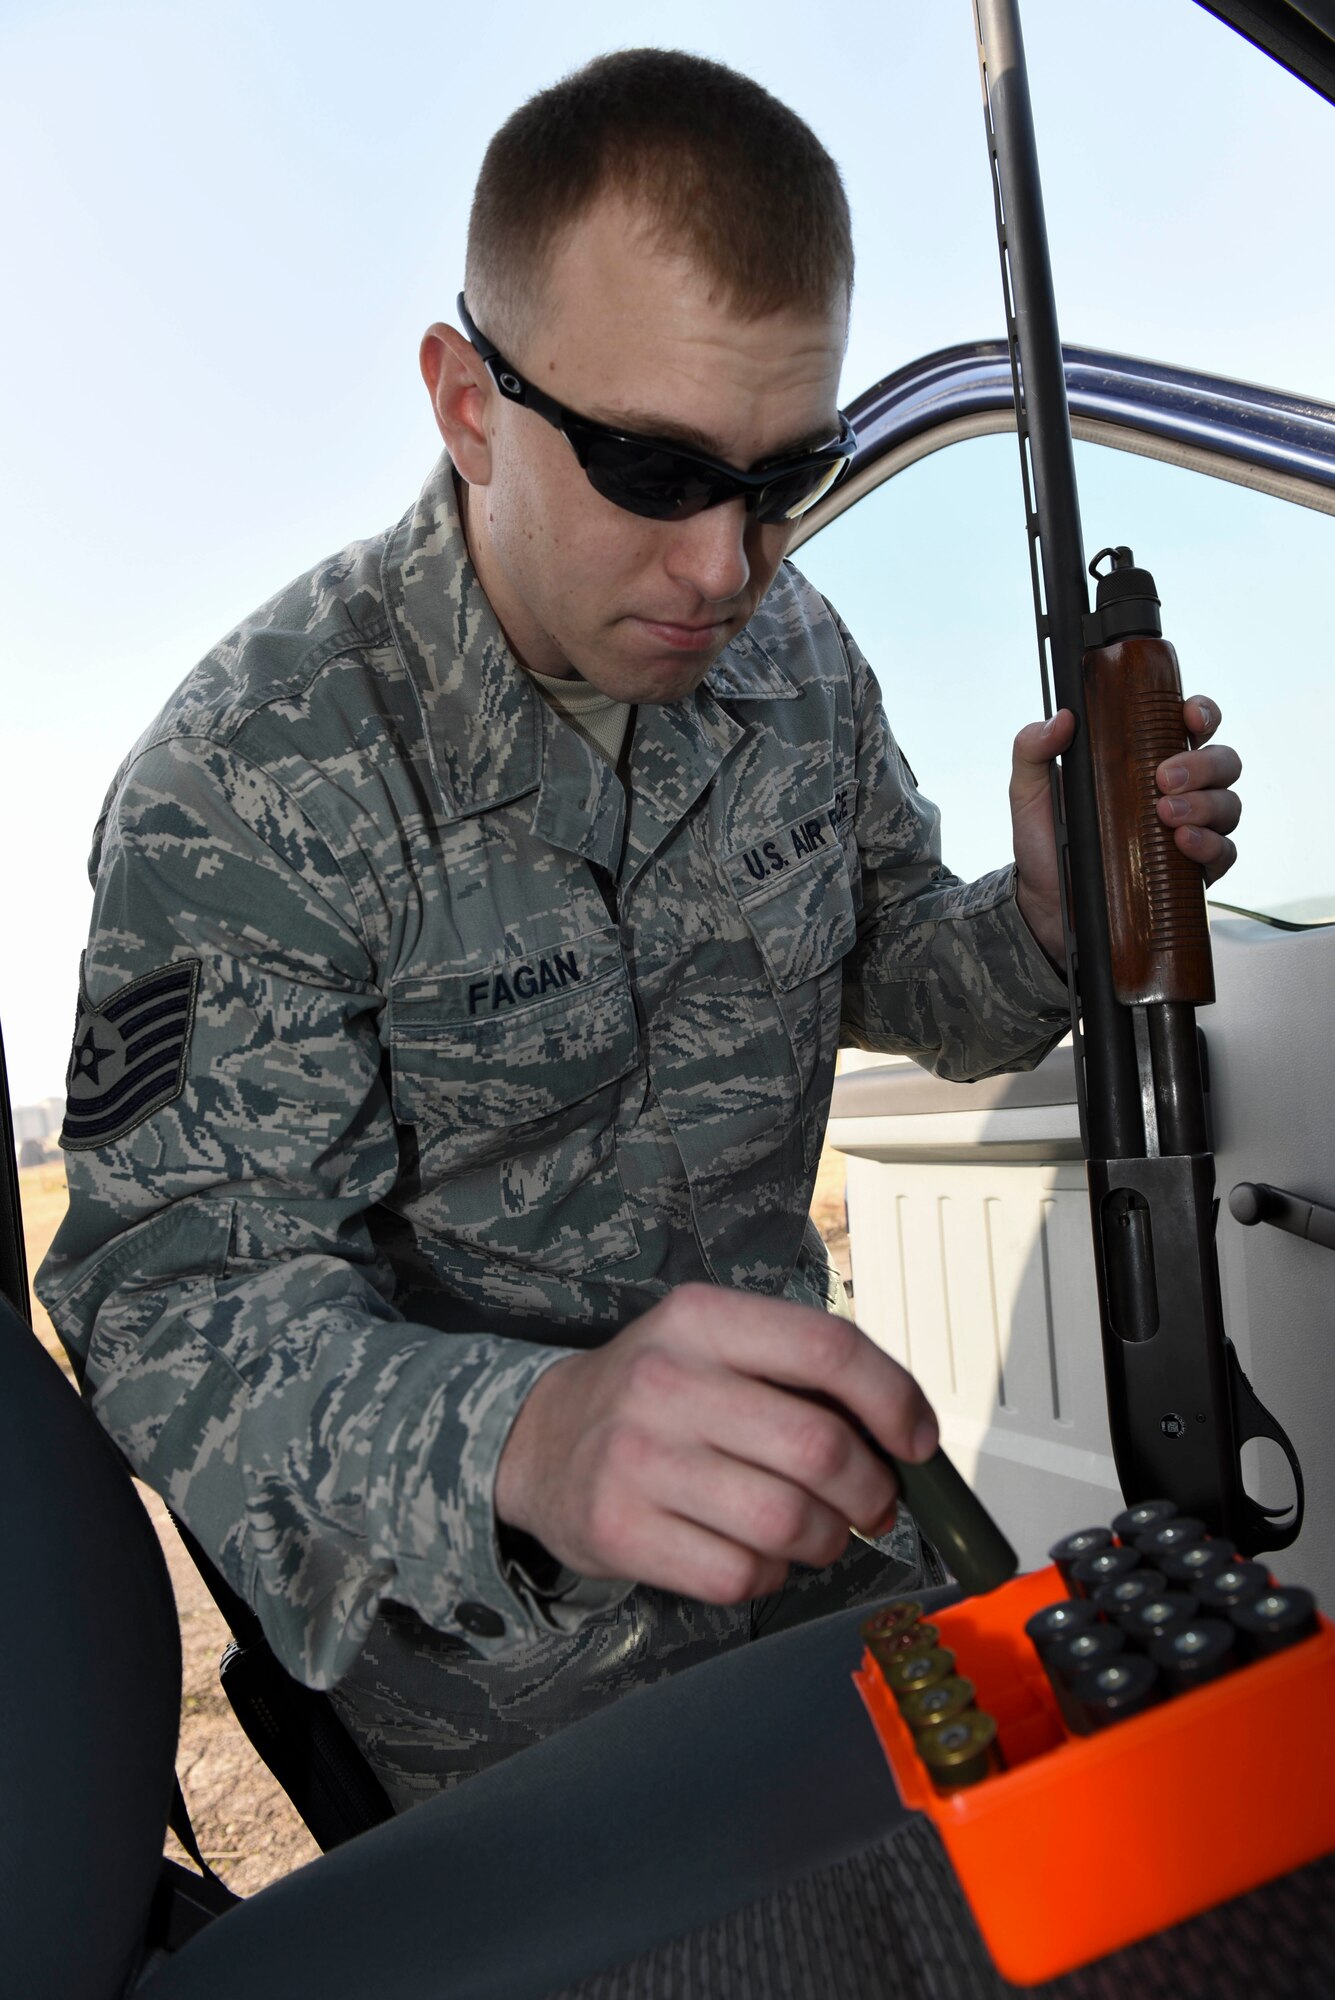 Tech. Sgt. Blake Fagan, 8th Operations Support Squadron aircraft management training noncommissioned officer in charge, picks up ammunition for his shotgun at Kunsan Air Base, Republic of Korea, Jan. 3, 2017. Fagan uses multiple tools as part of the Bird/wildlife Aircraft Striking Hazard program to deter wildlife that could cause significant damage to aircraft. (U.S. Air Force photo by Senior Airman Michael Hunsaker)